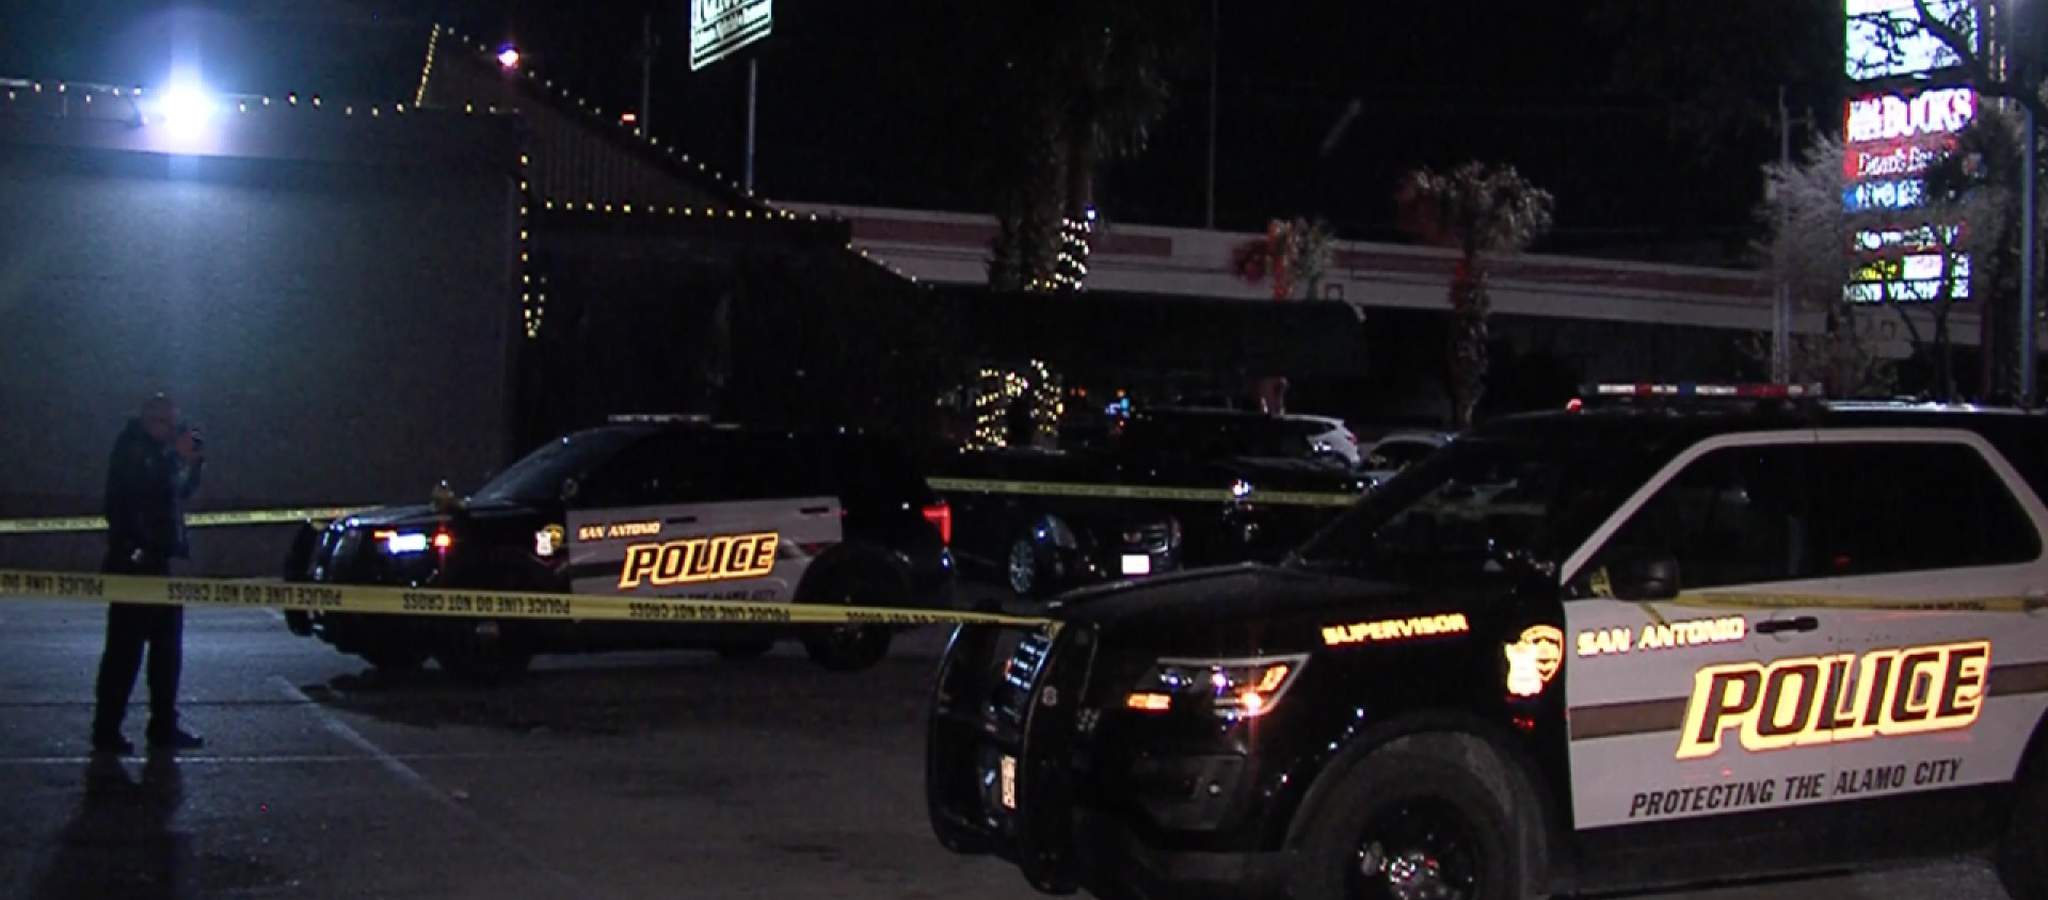 Man shot, injured outside gentleman’s club after trying to choke security guard, police say